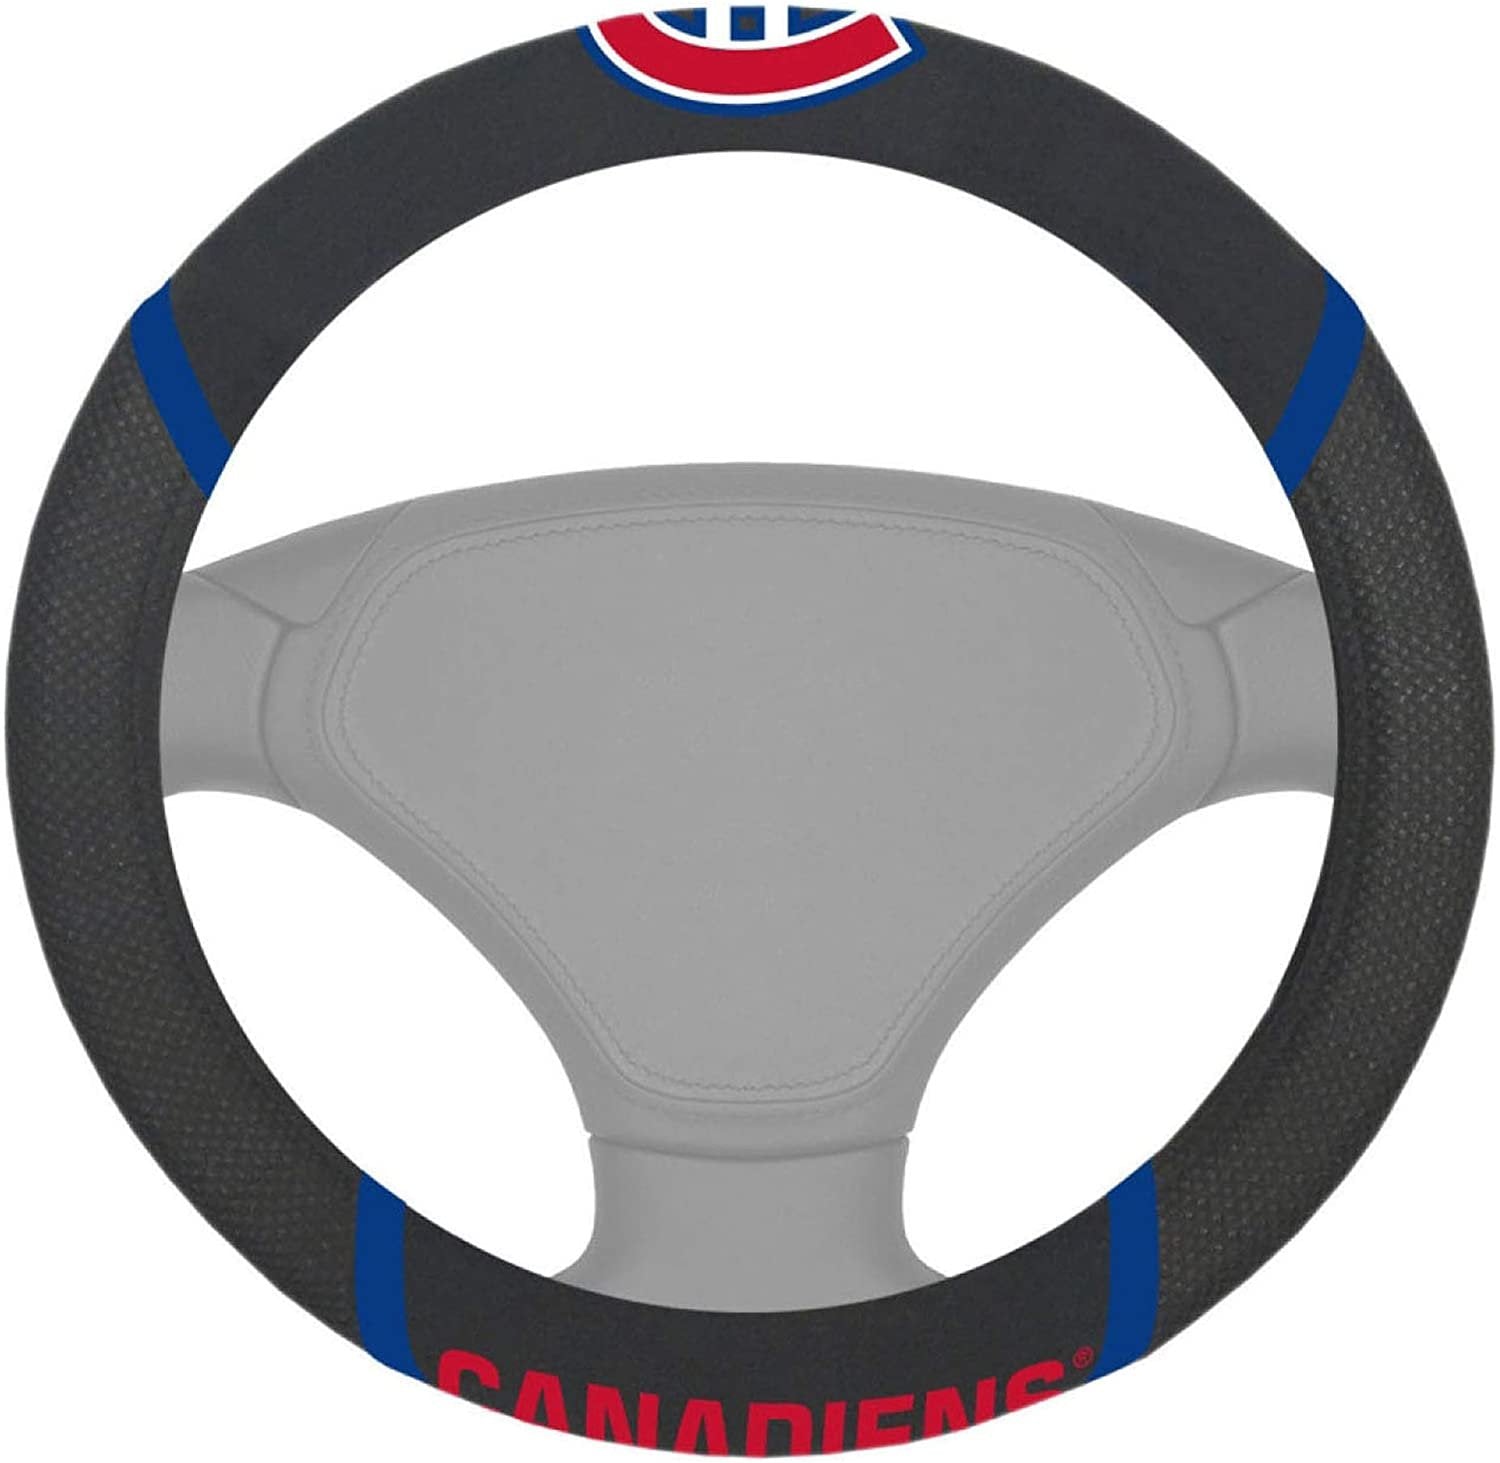 Montreal Canadiens Steering Wheel Cover Premium Embroidered Black 15 Inch